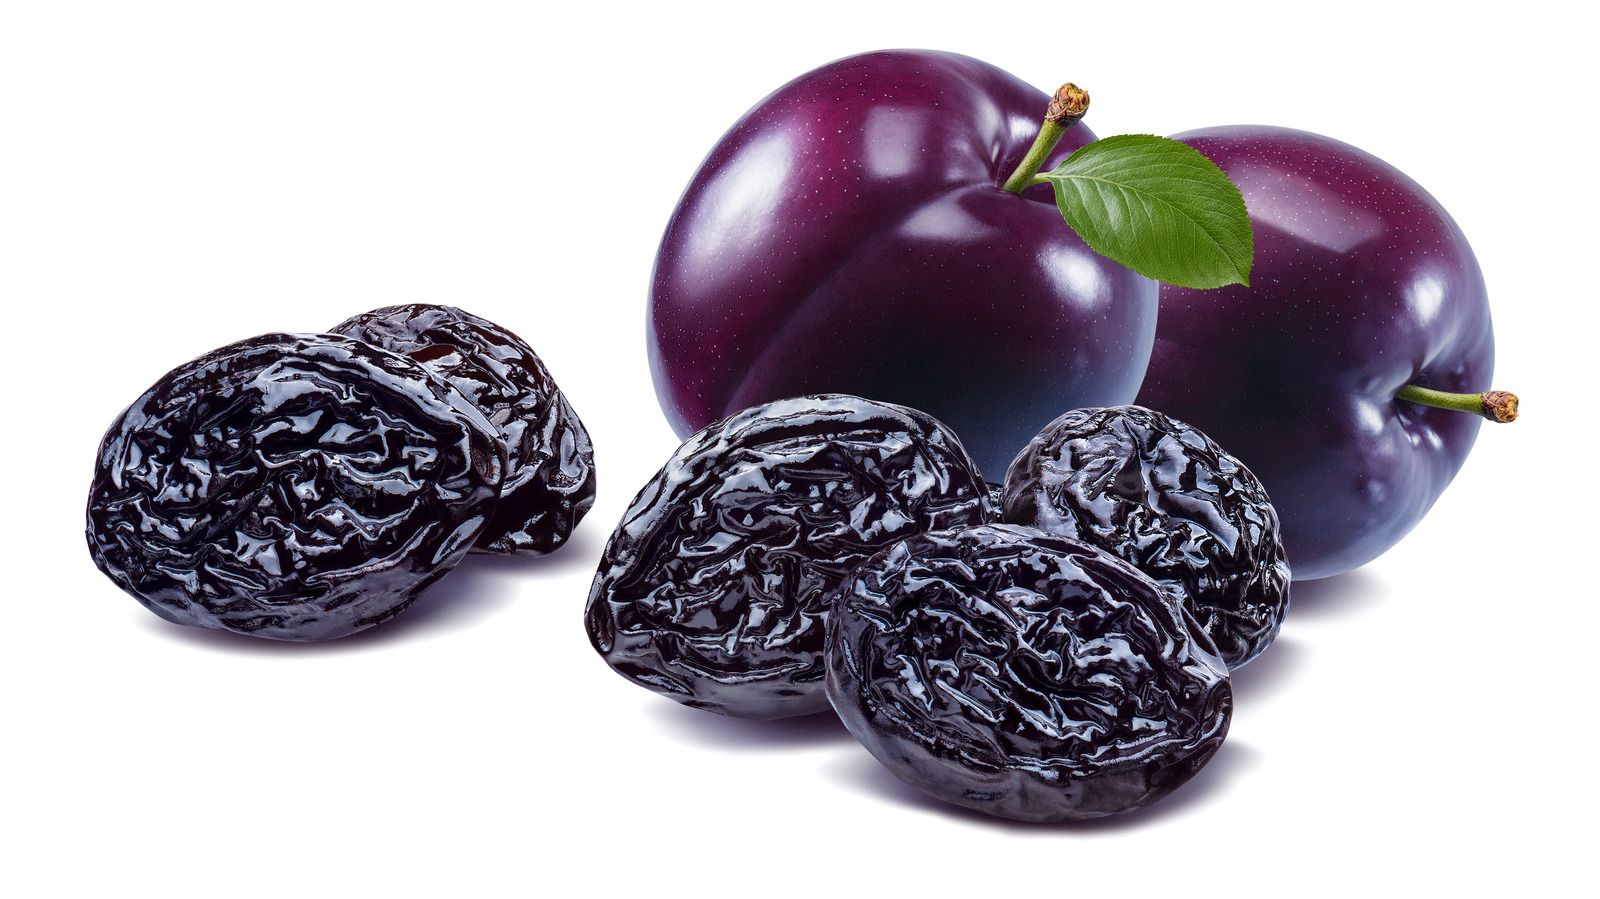 https://www.mashed.com/img/gallery/prunes-vs-plums-how-are-they-different/l-intro-1621017304.jpg